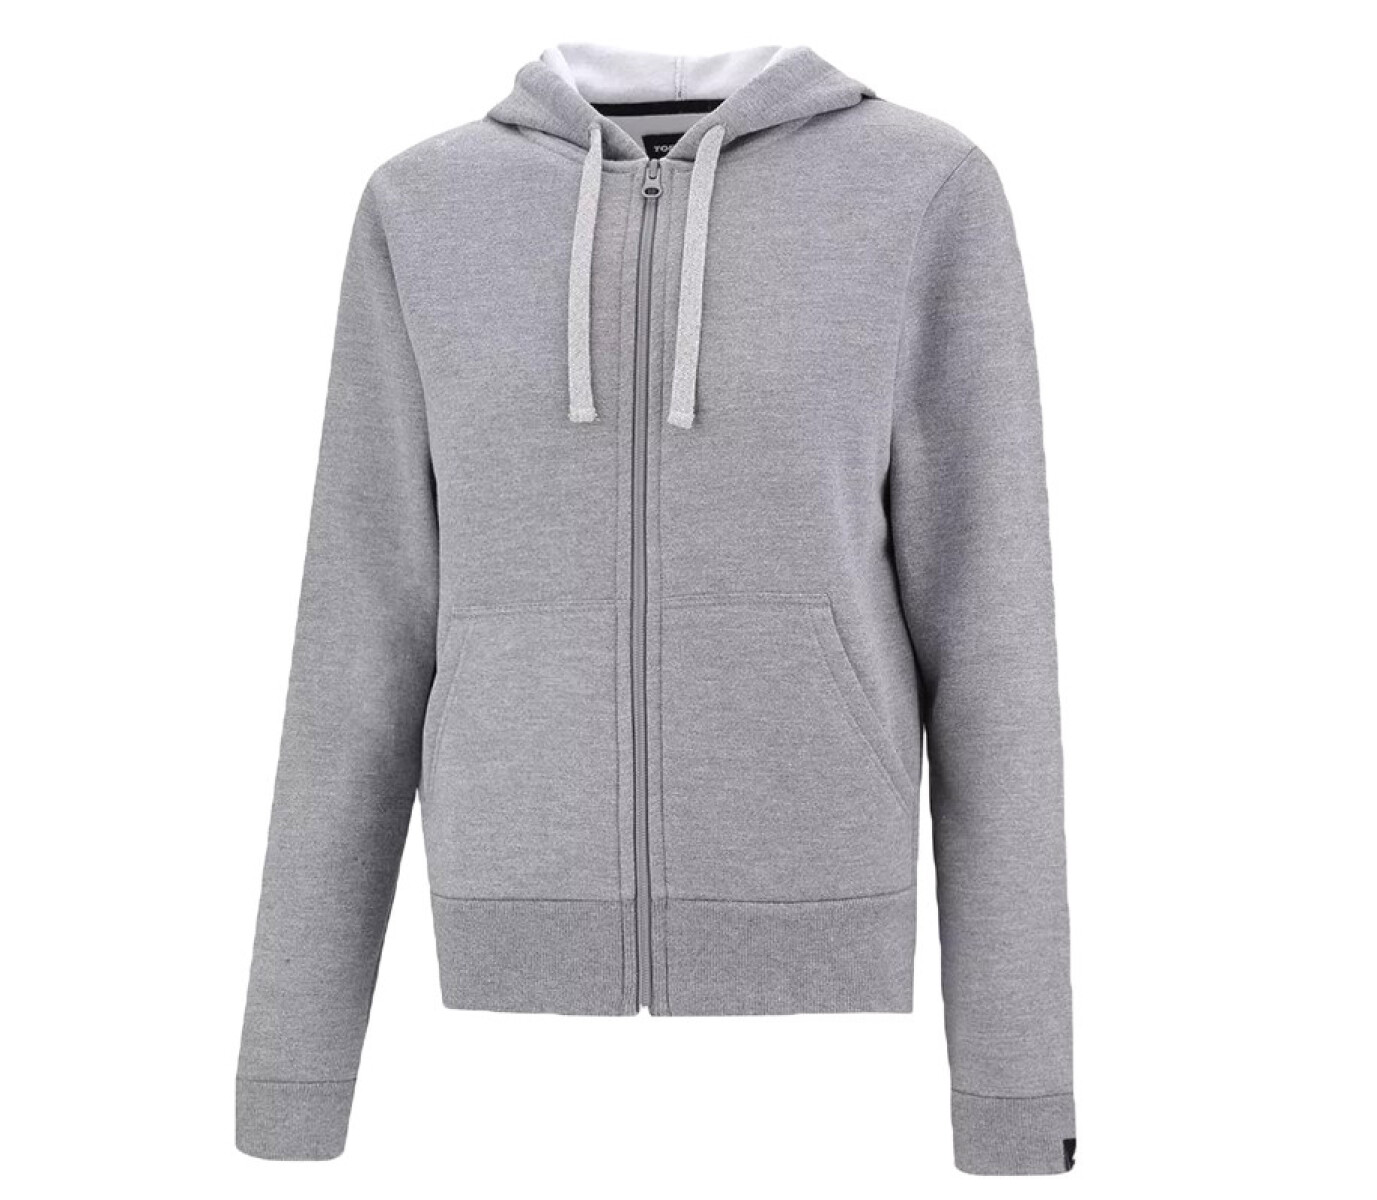 Campera Wns Basicos Topper - Gris 